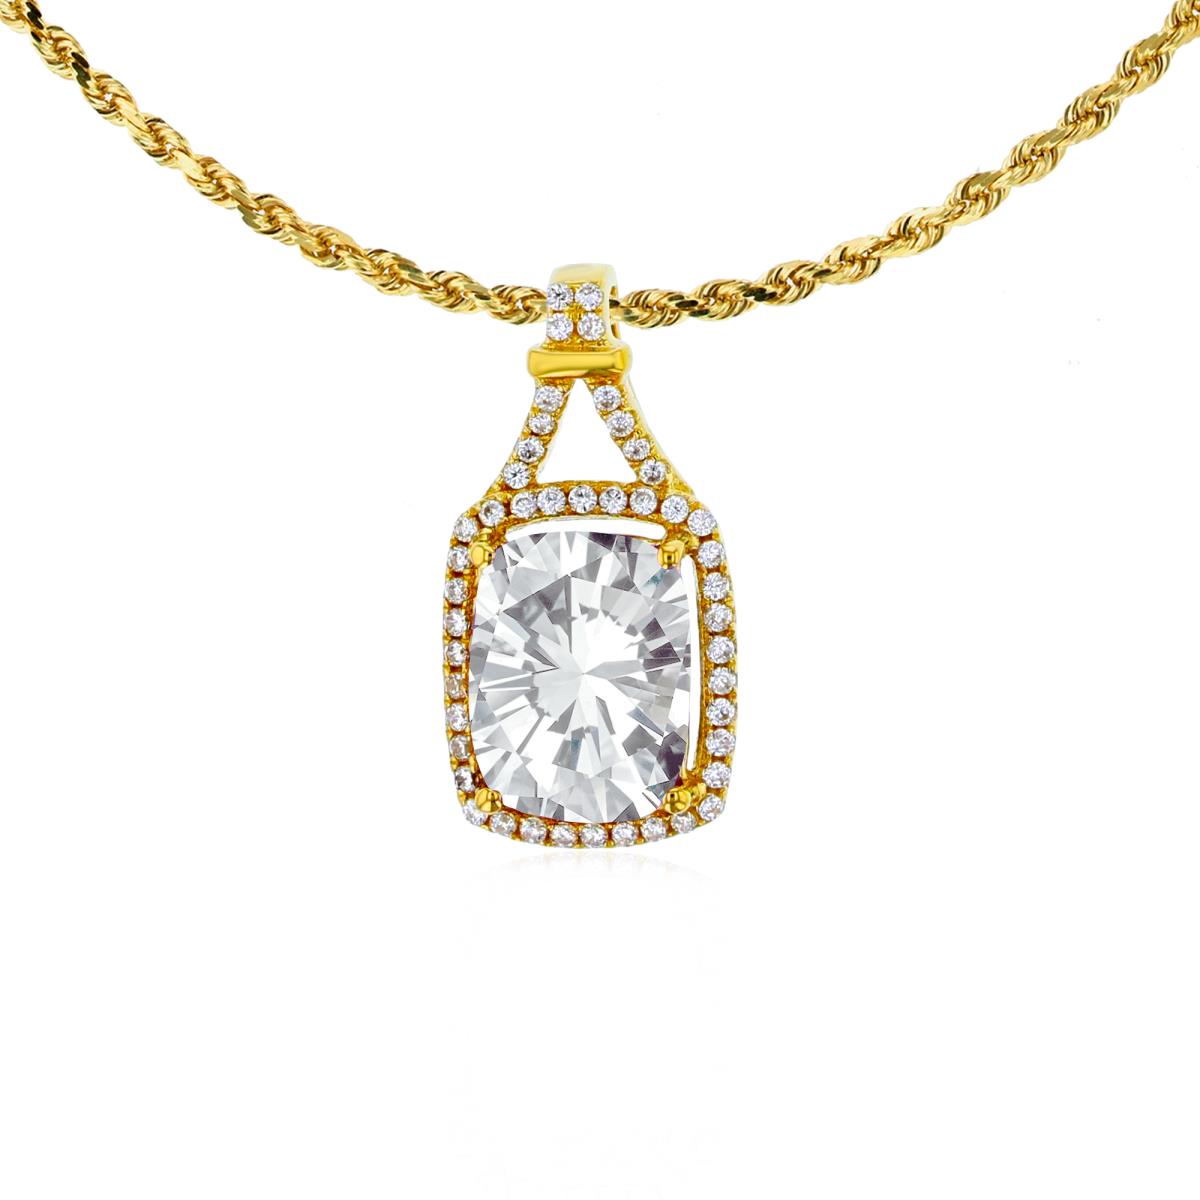 10K Yellow Gold 8x6mm Cushion White Topaz & 0.13 CTTW Rd Diamonds Halo 18" Rope Chain Necklace